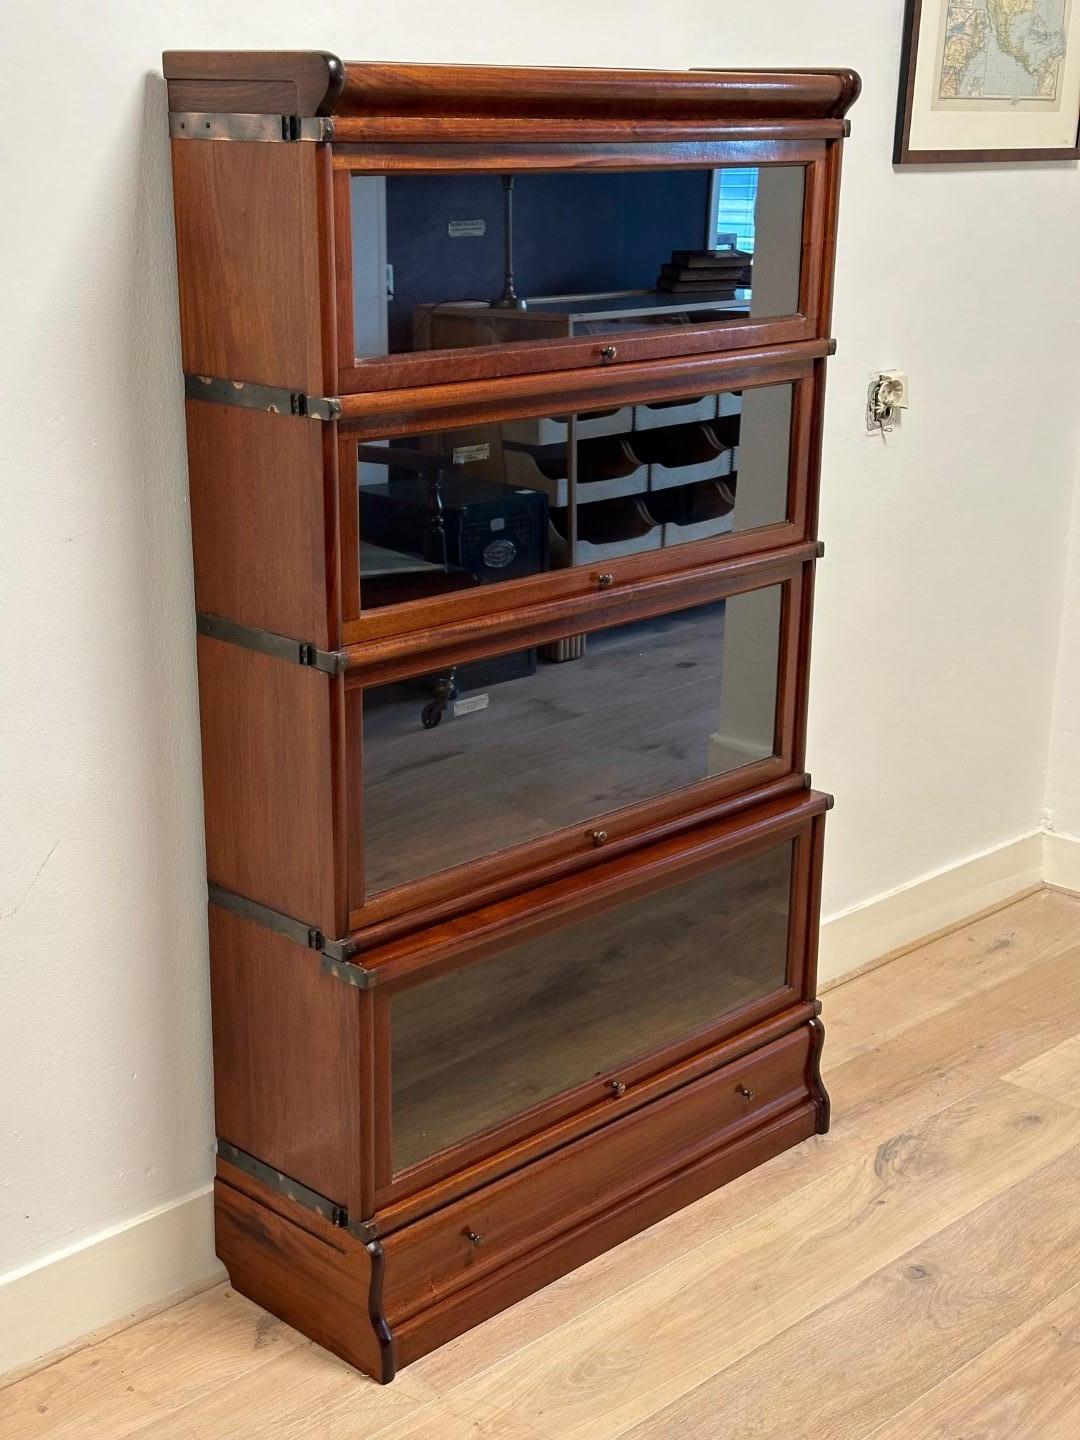 Beautiful antique mahogany Globe Wernicke bookcase consisting of 4 stackable parts. With drawer in the plinth.

Origin: England
Period: Approx. 1900
Size: Br. 86cm, D.29/26cm, H. 146cm